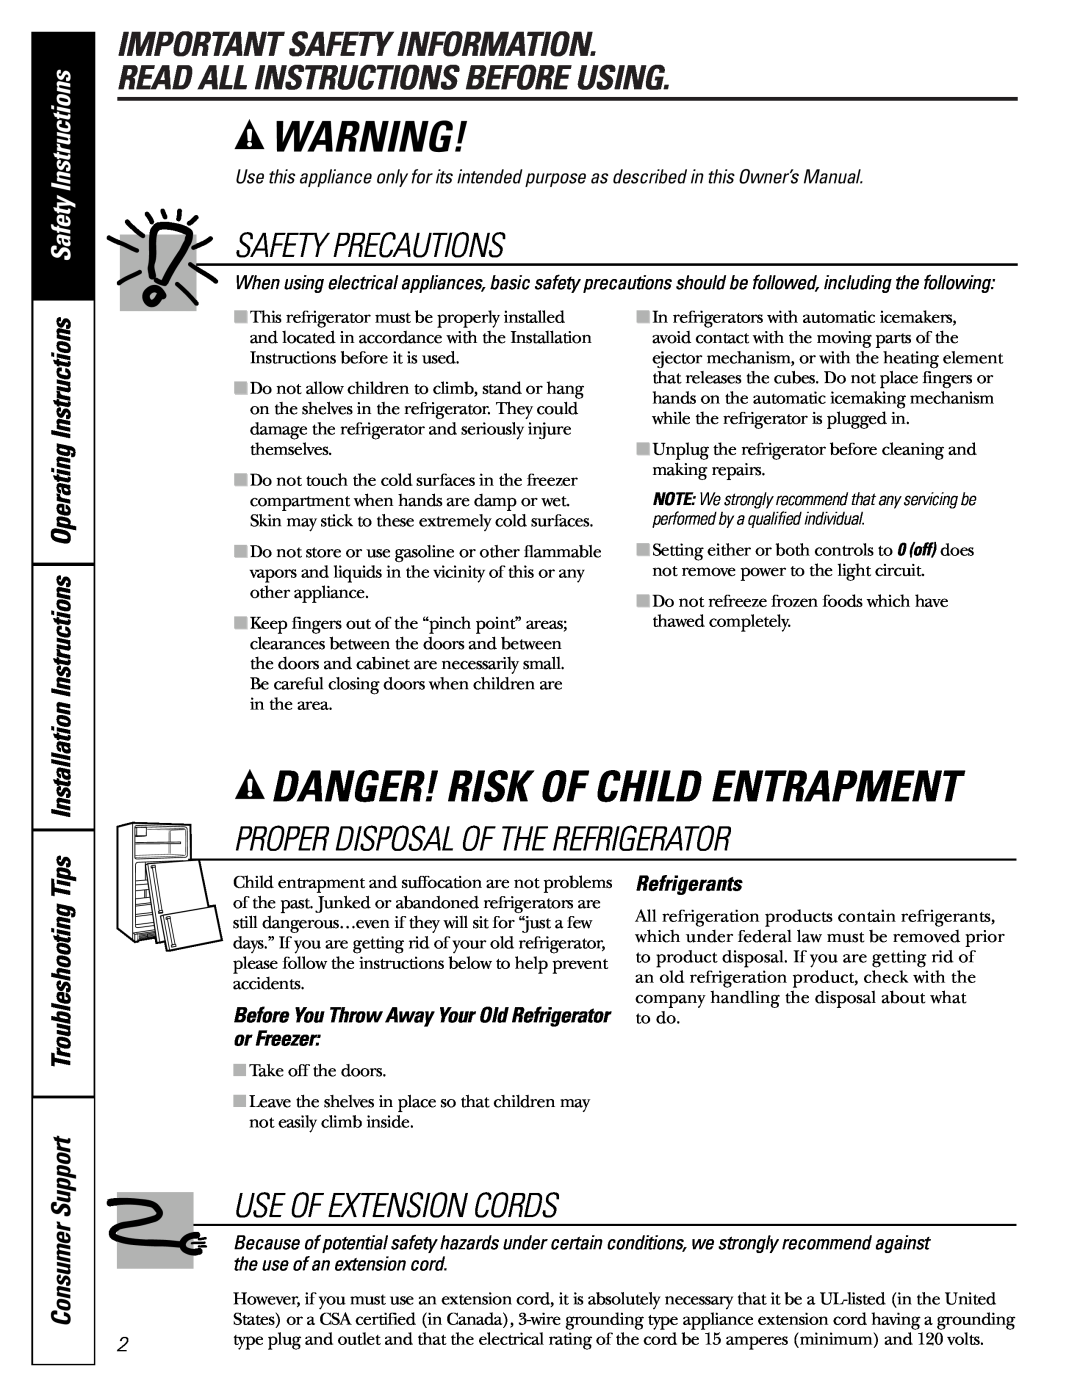 GE GDL22KCWSS Danger! Risk Of Child Entrapment, Important Safety Information Read All Instructions Before Using, Consumer 